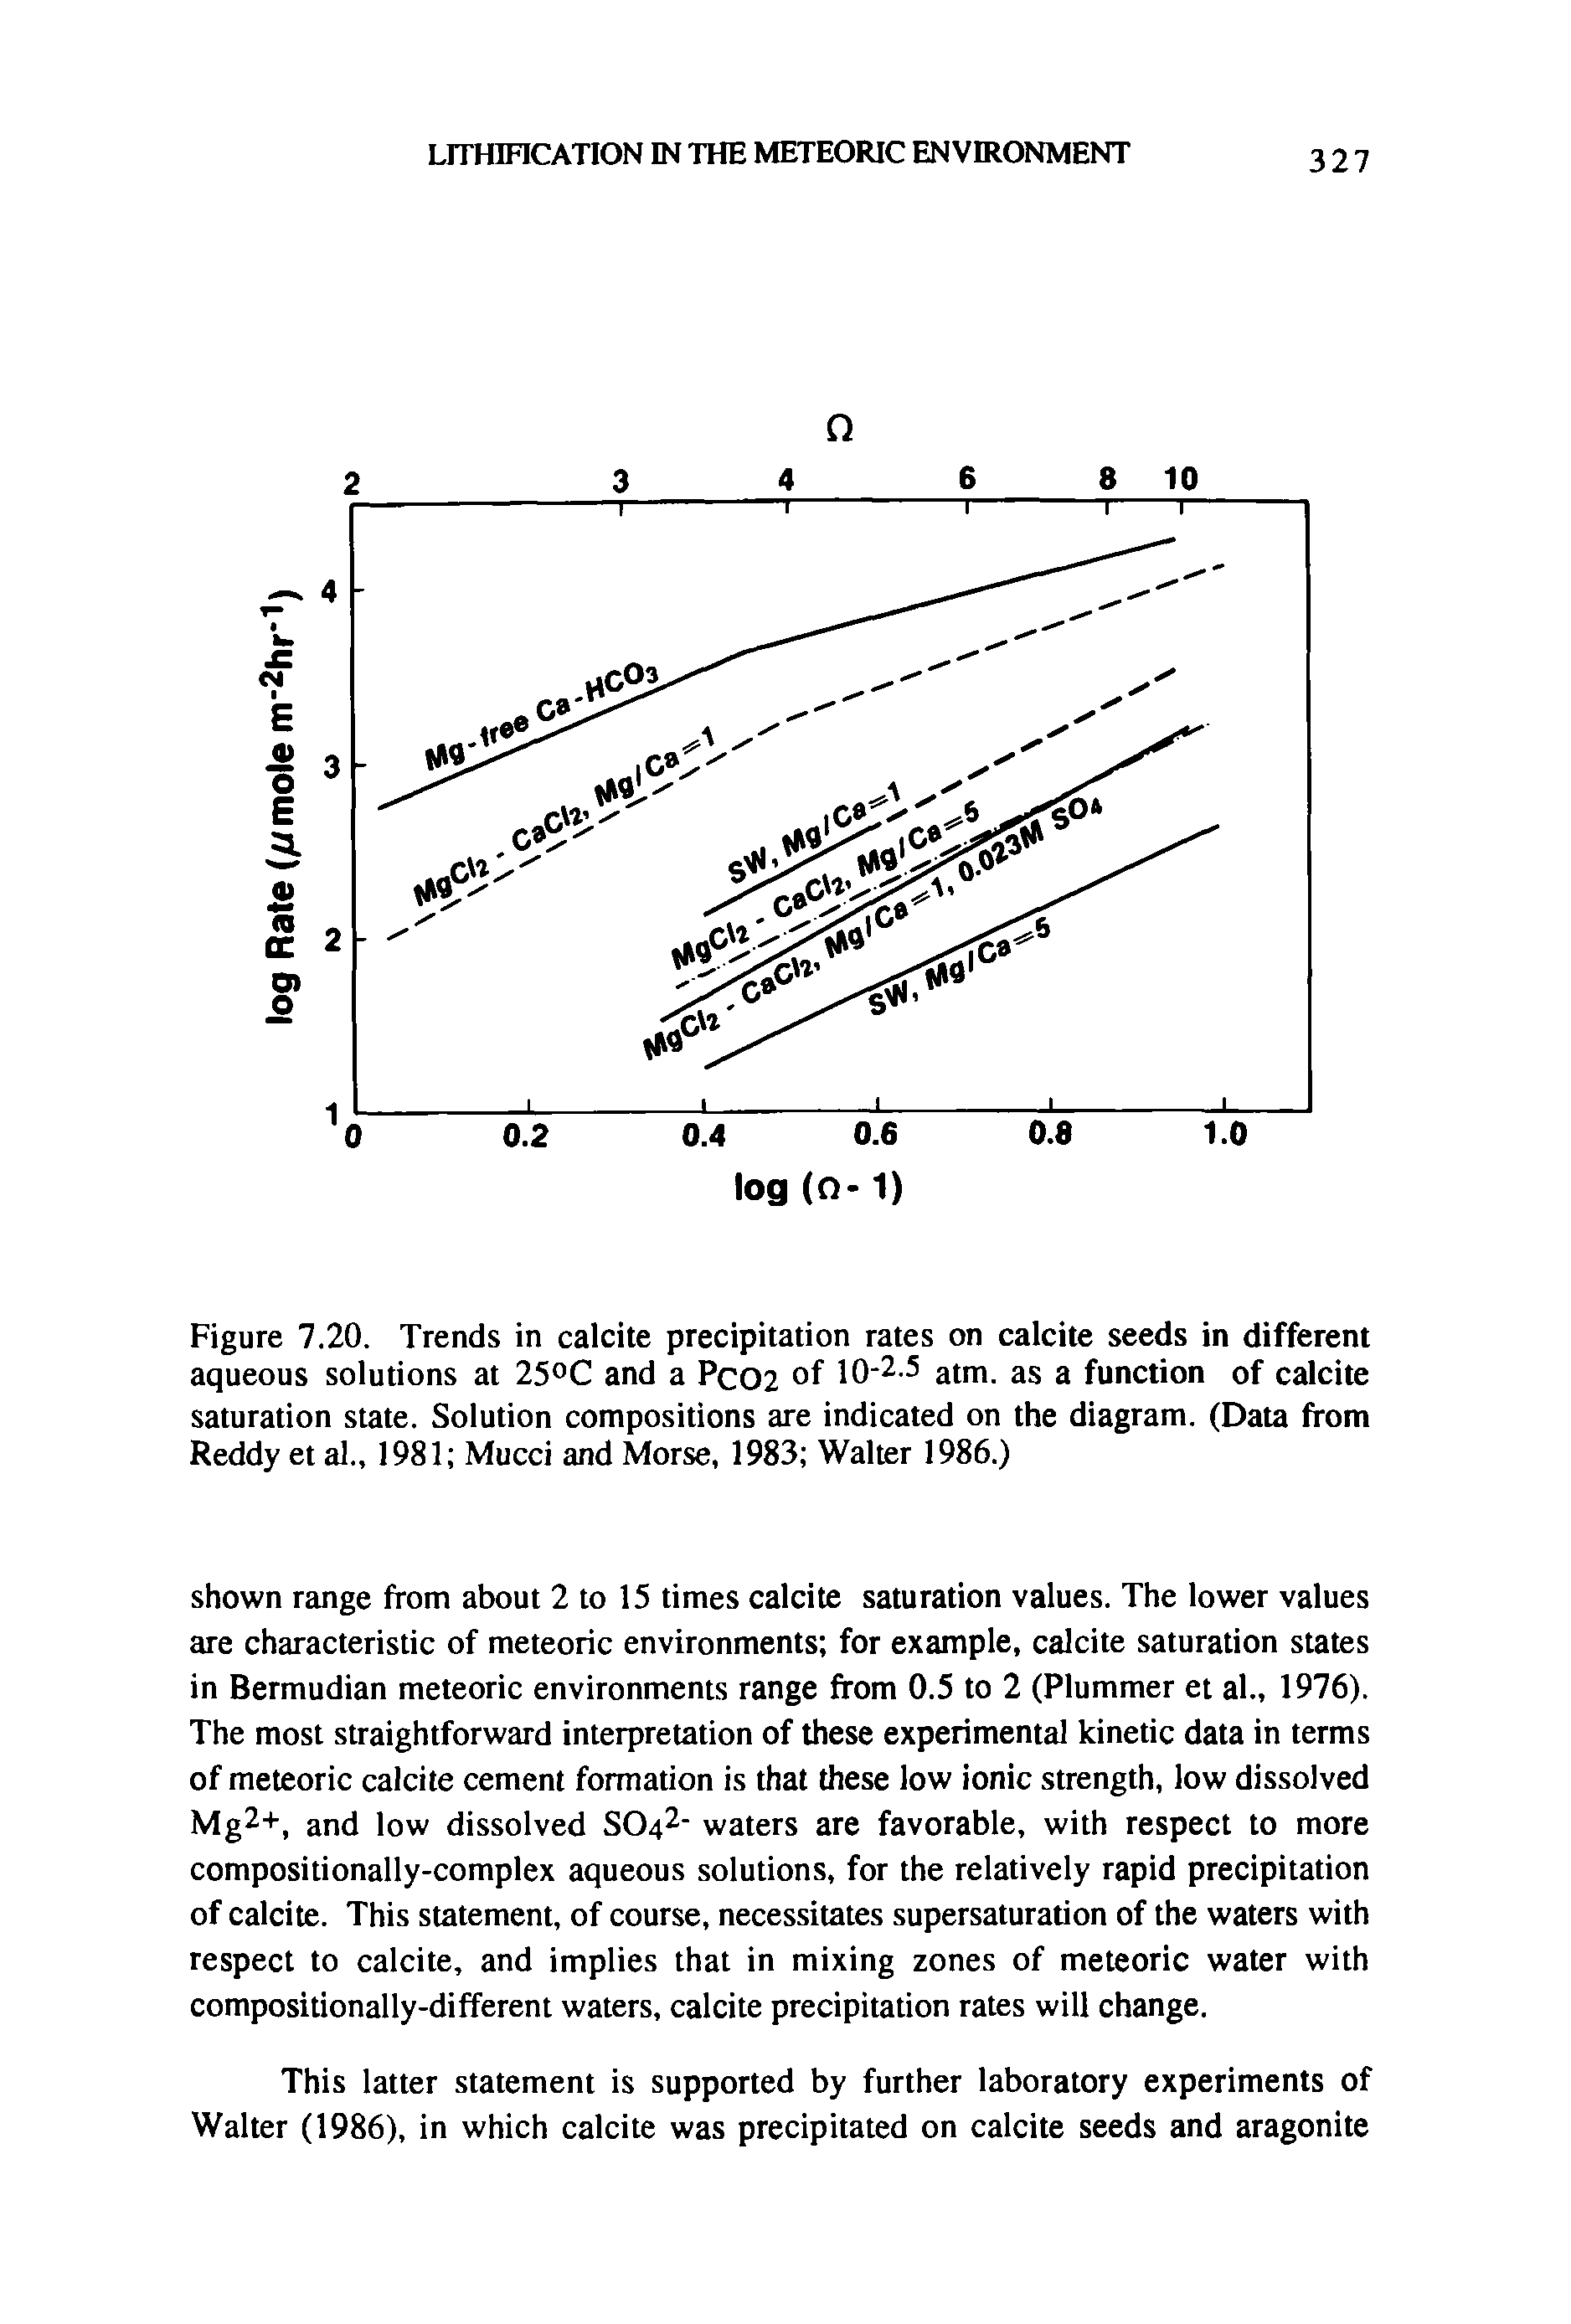 Figure 7.20. Trends in calcite precipitation rates on calcite seeds in different aqueous solutions at 25°C and a Pc02 °f 10 2-5 atm. as a function of calcite saturation state. Solution compositions are indicated on the diagram. (Data from Reddy et al., 1981 Mucci and Morse, 1983 Walter 1986.)...